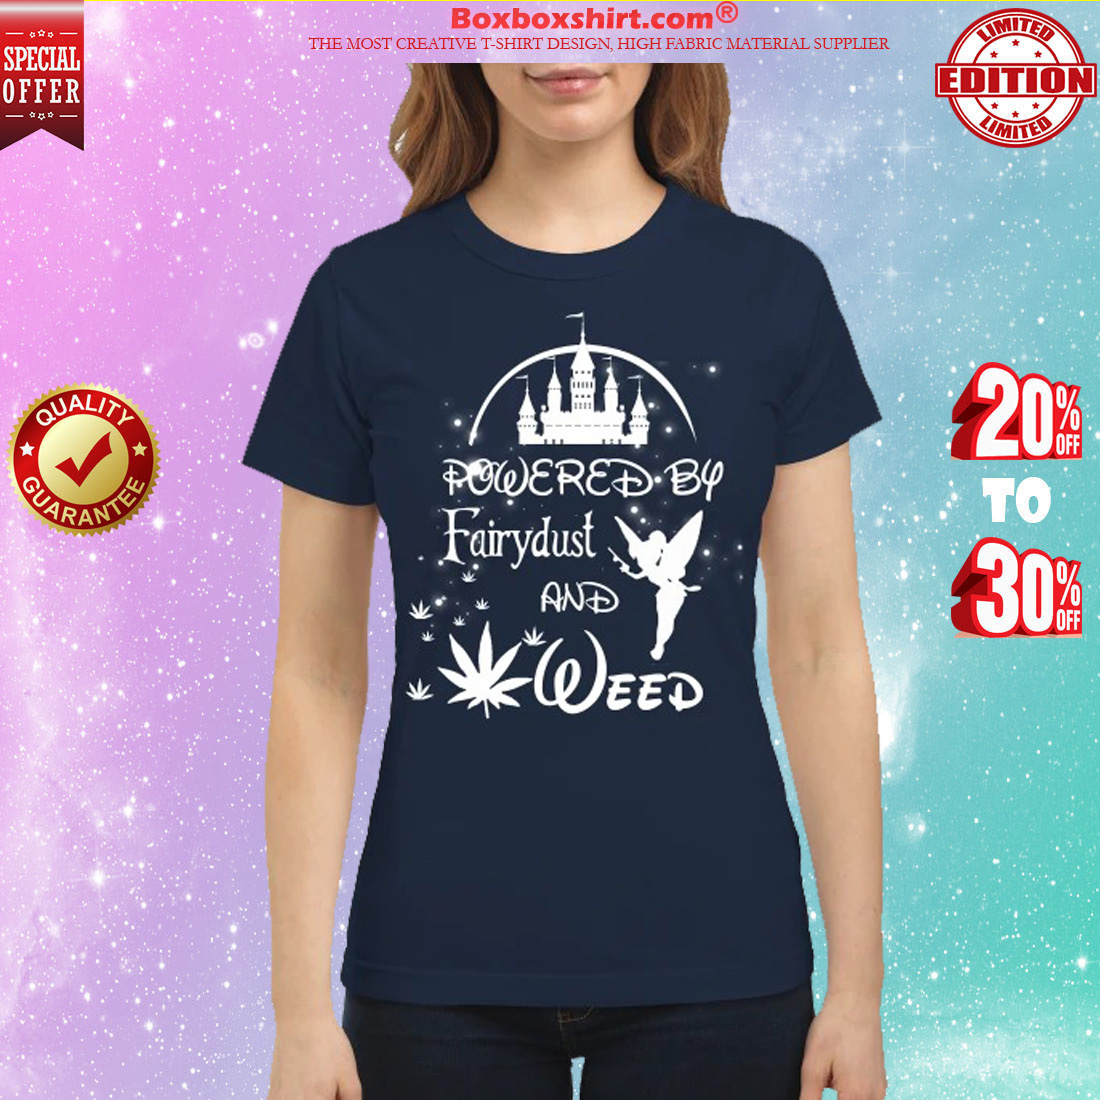 Disney Powered by Fairydust and weed classic shirt